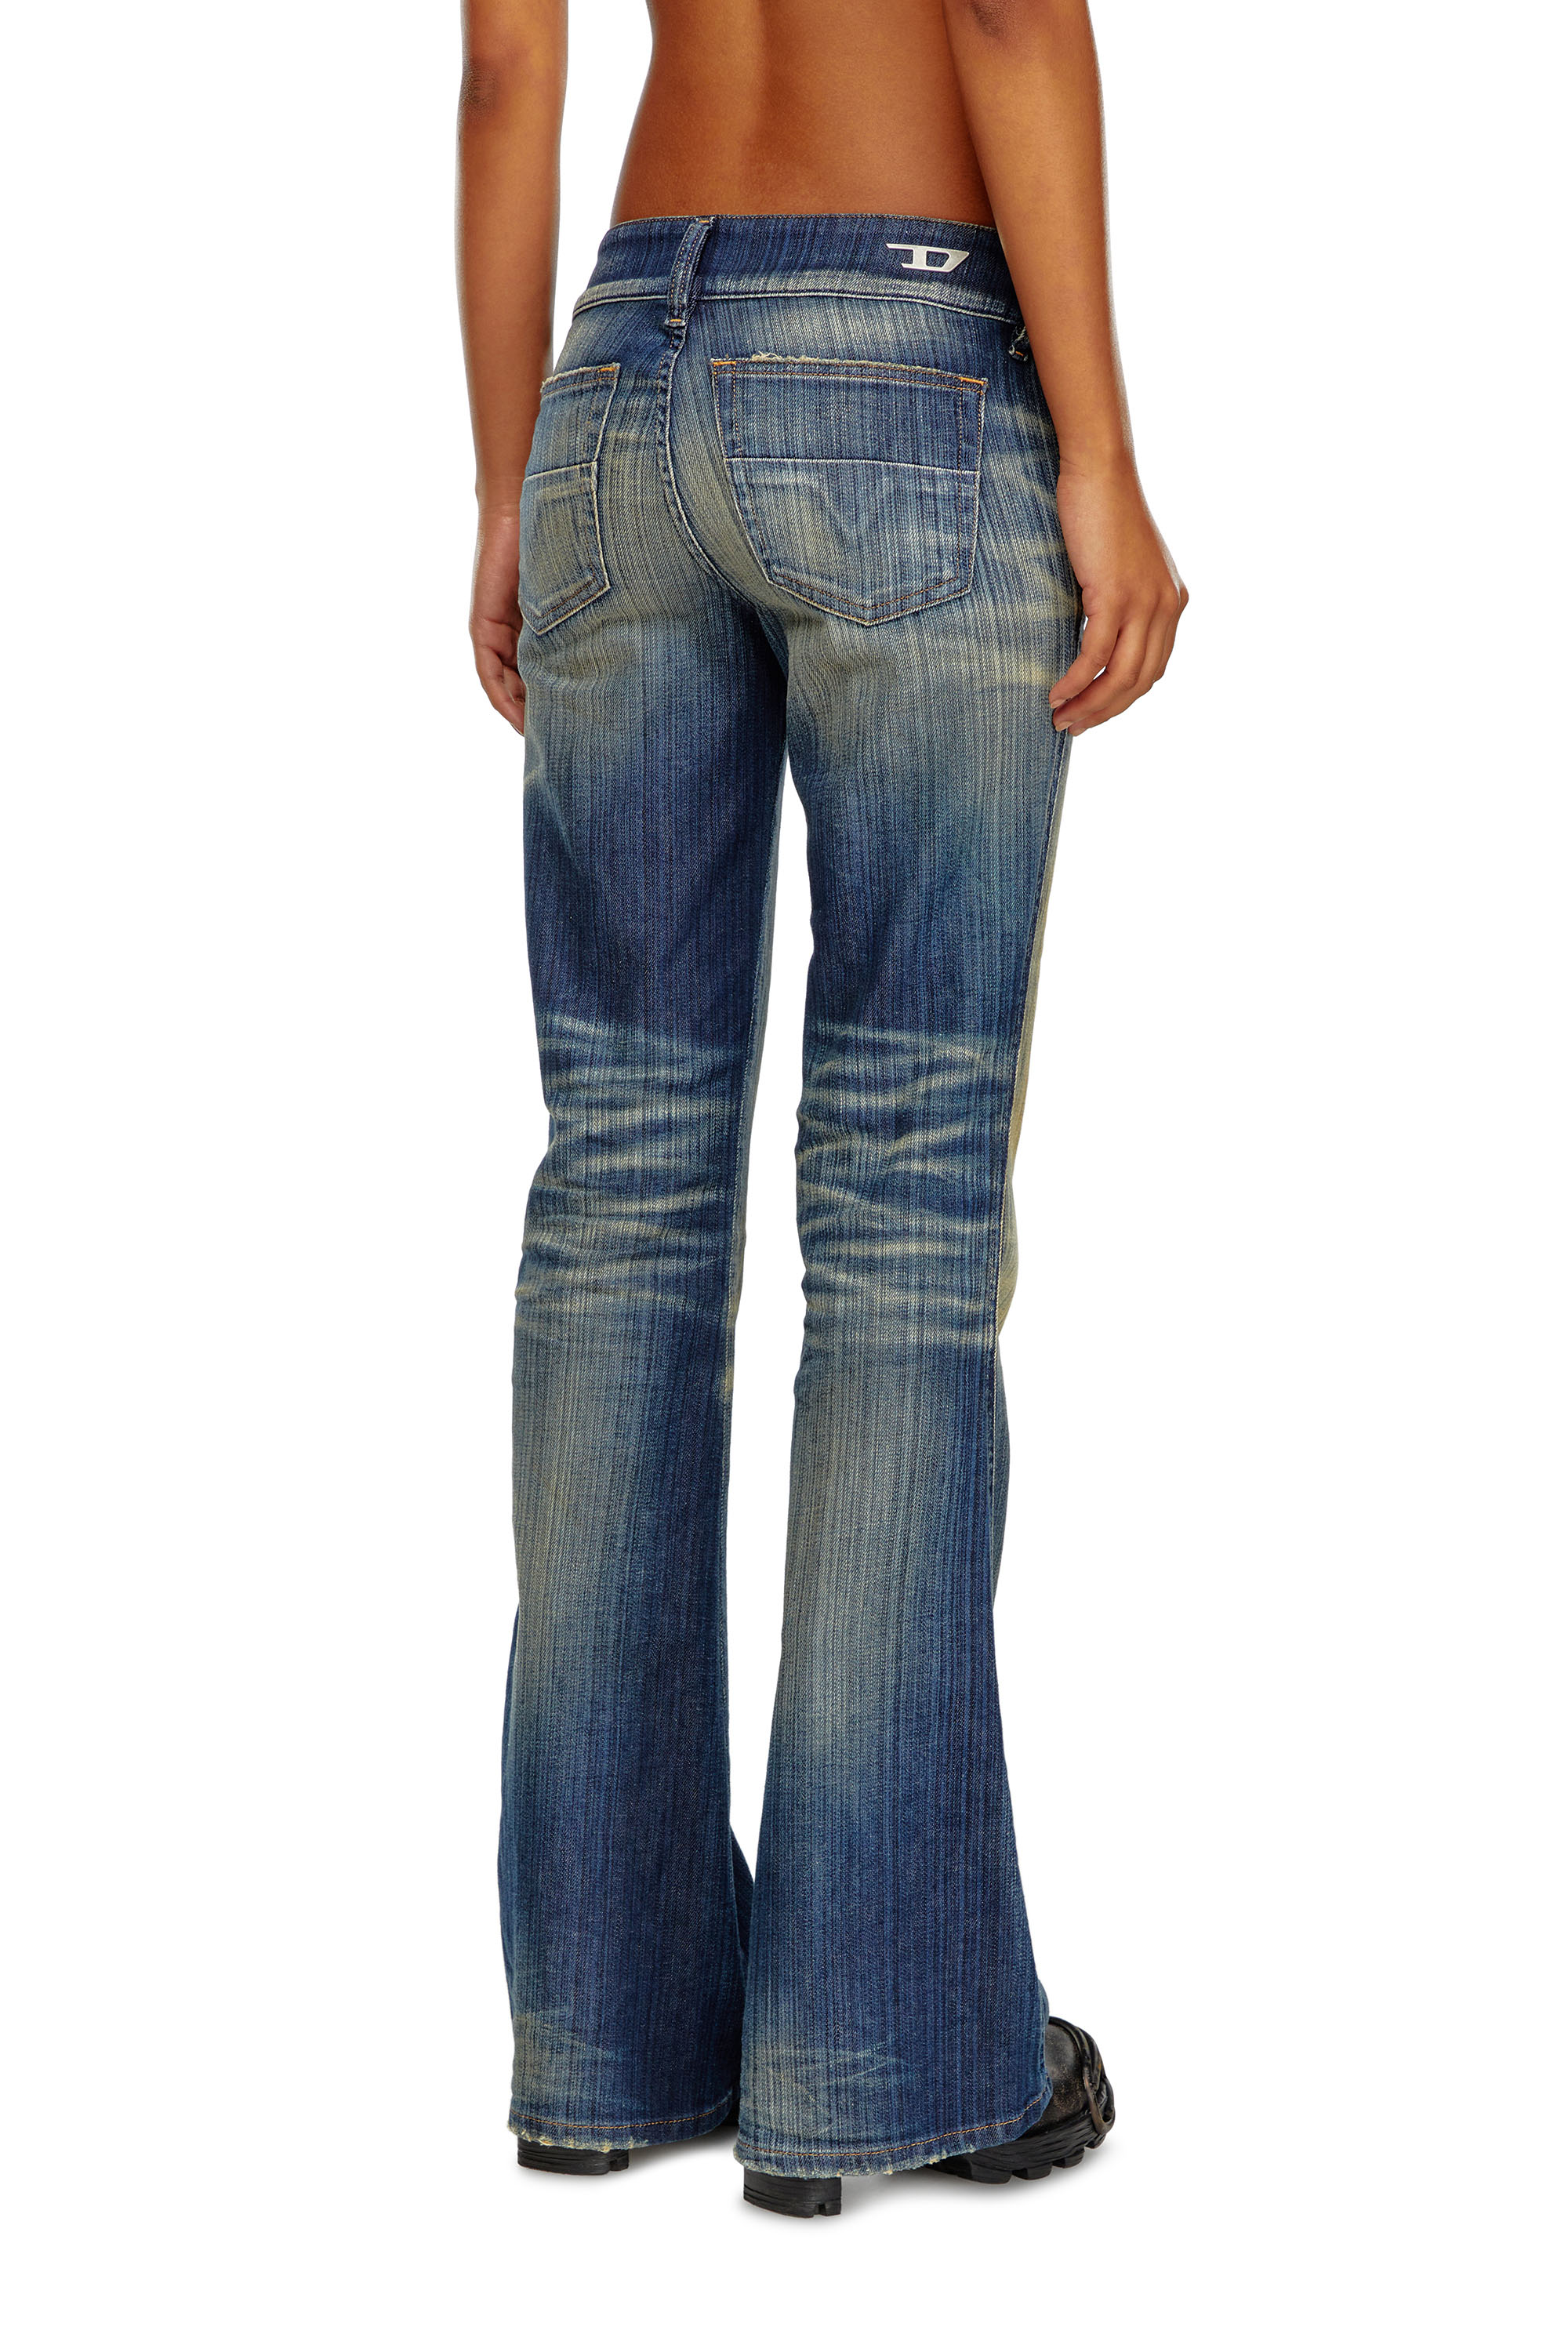 Diesel - Bootcut and Flare Jeans D-Hush 09J46, Mujer Bootcut y Flare Jeans - D-Hush in Azul marino - Image 4